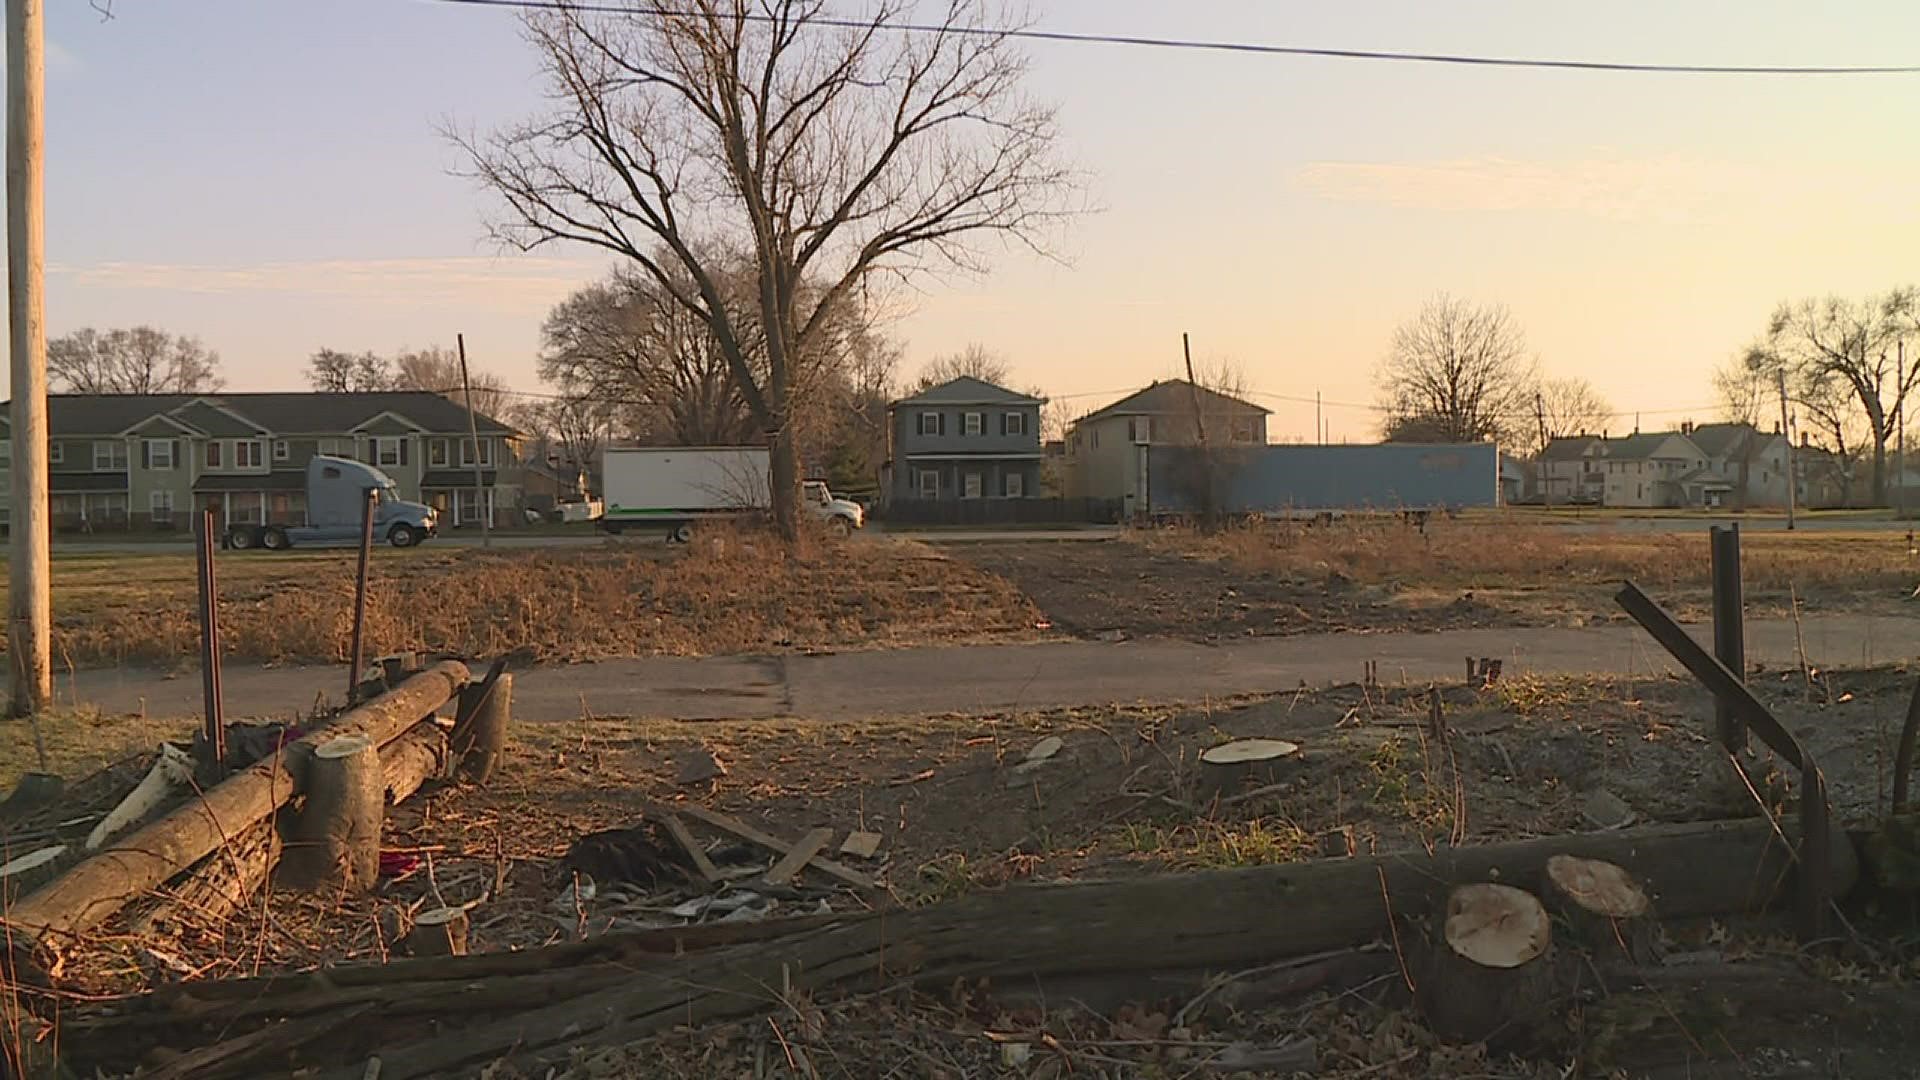 Habitat for Humanity of the Quad Cities waits for funding from the city of Rock Island before moving forward on buying land.